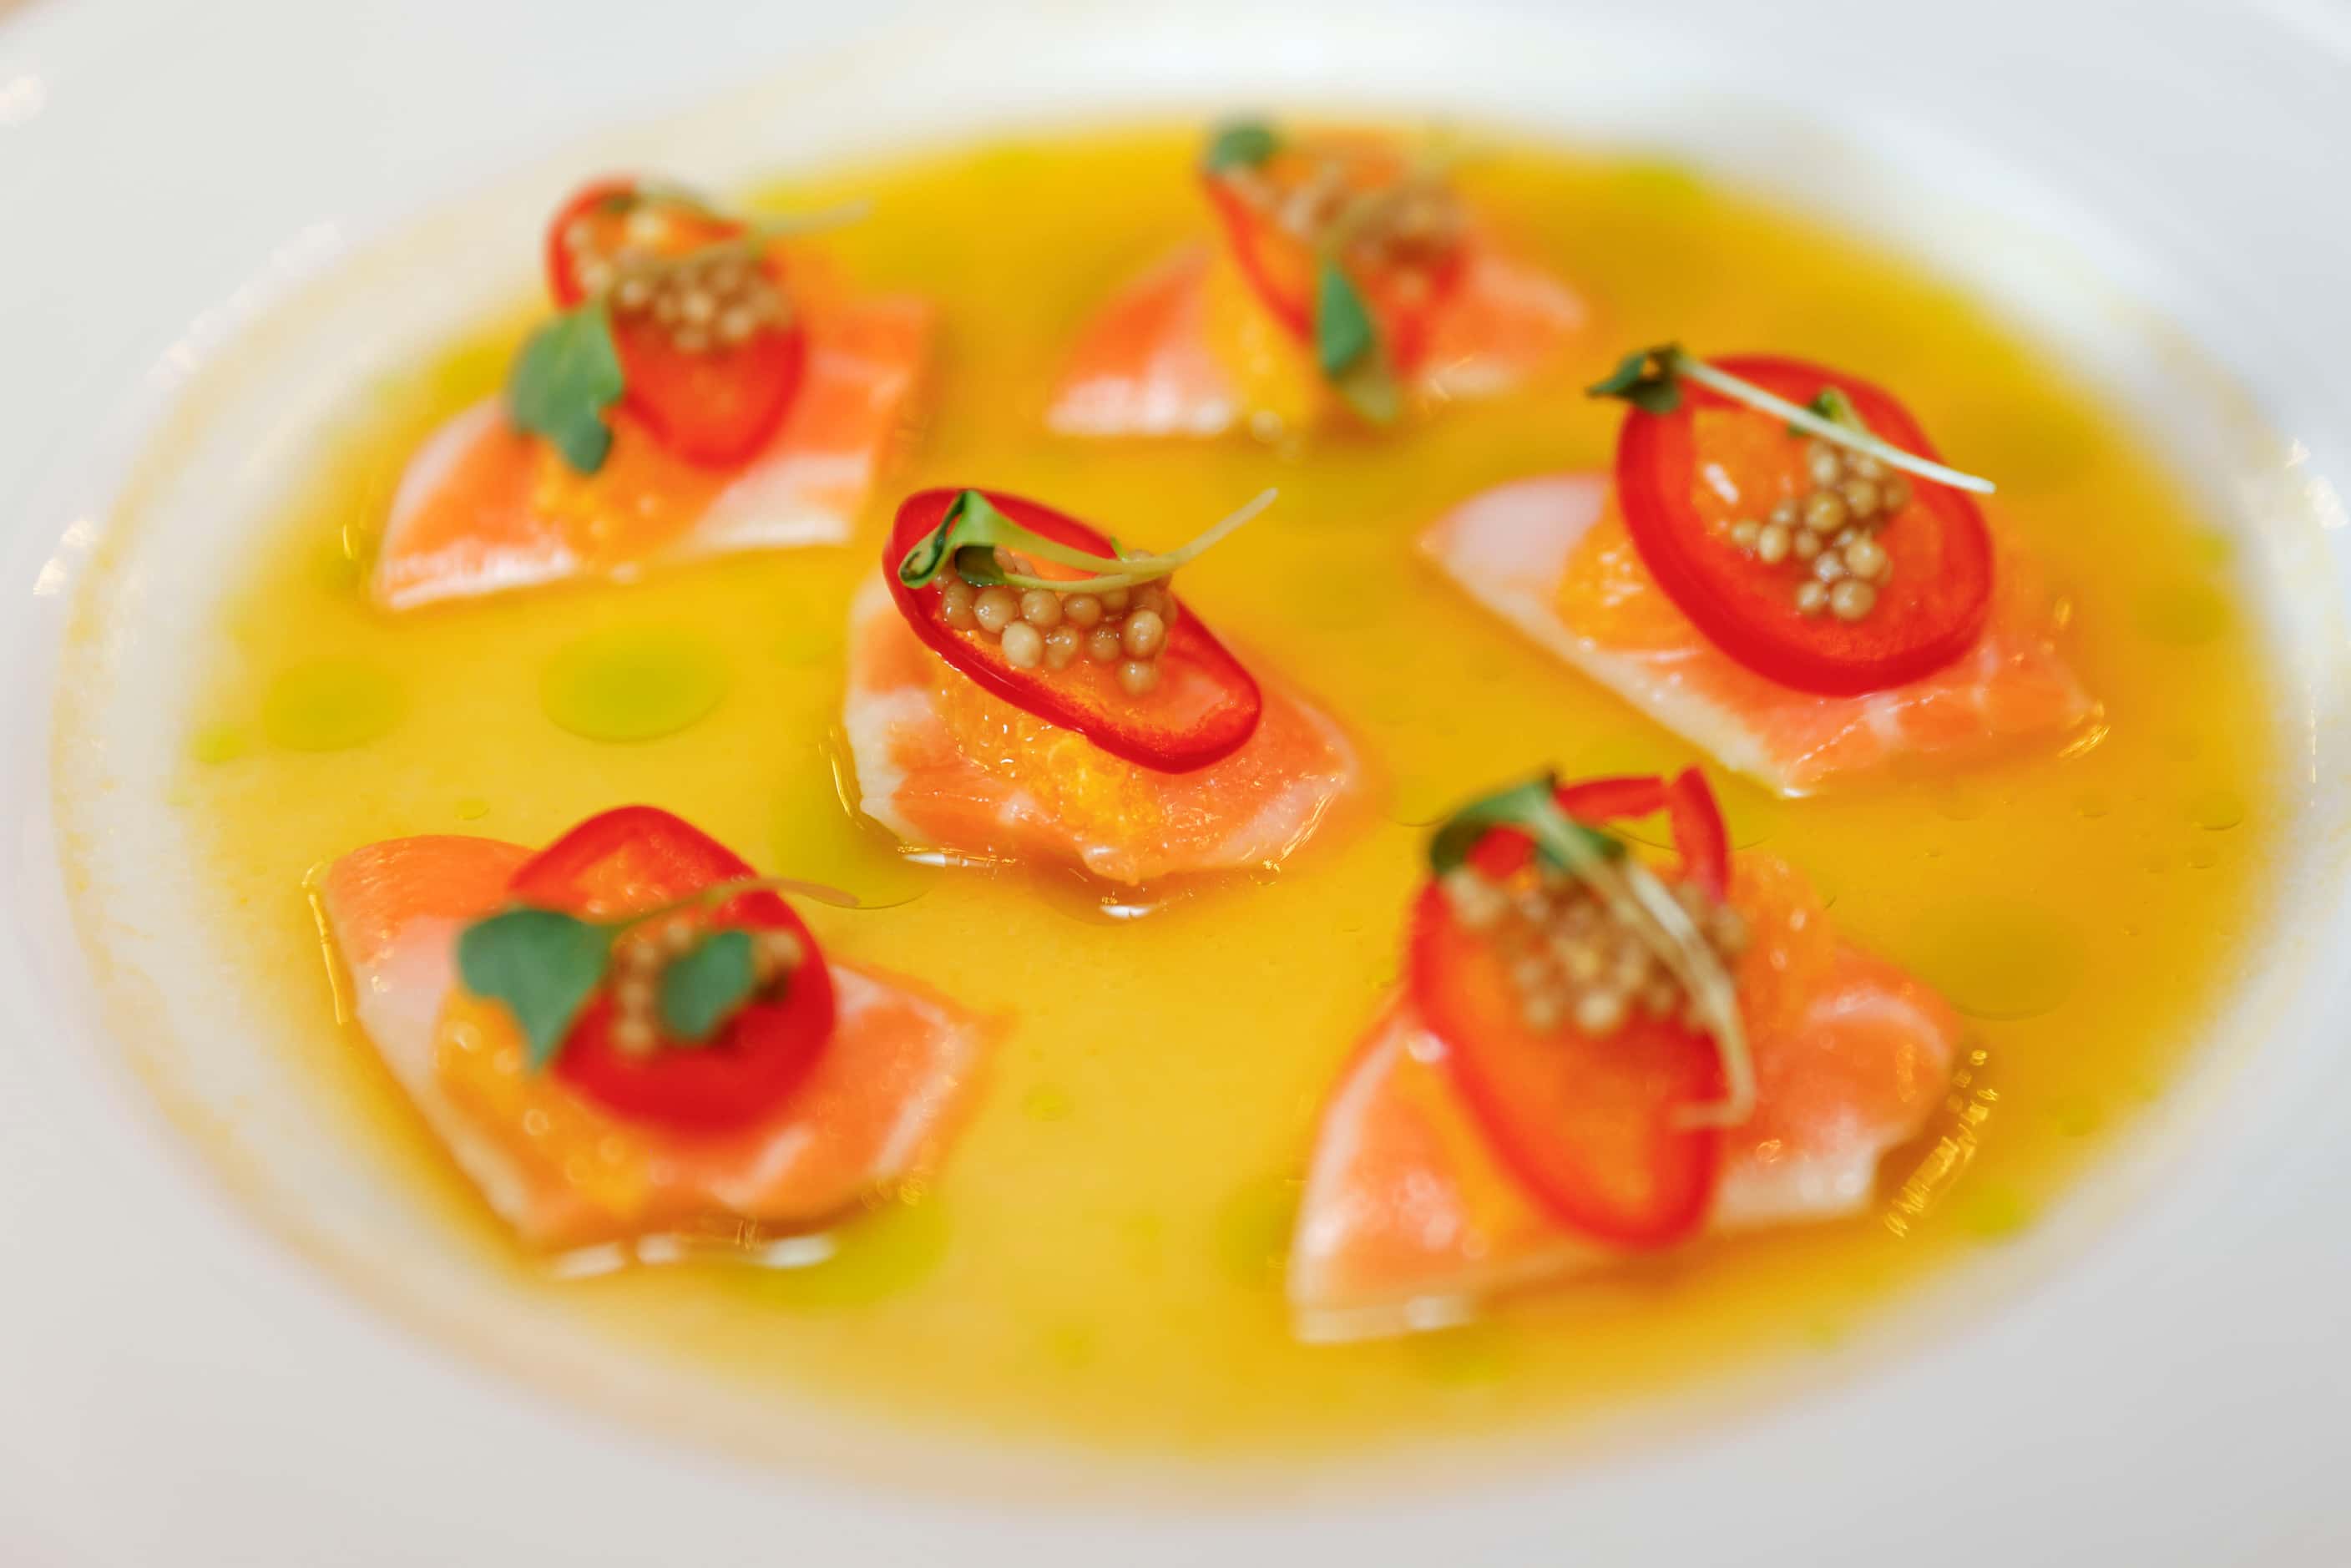 Crudo is a light and bright starter at The Butcher's Cellar.